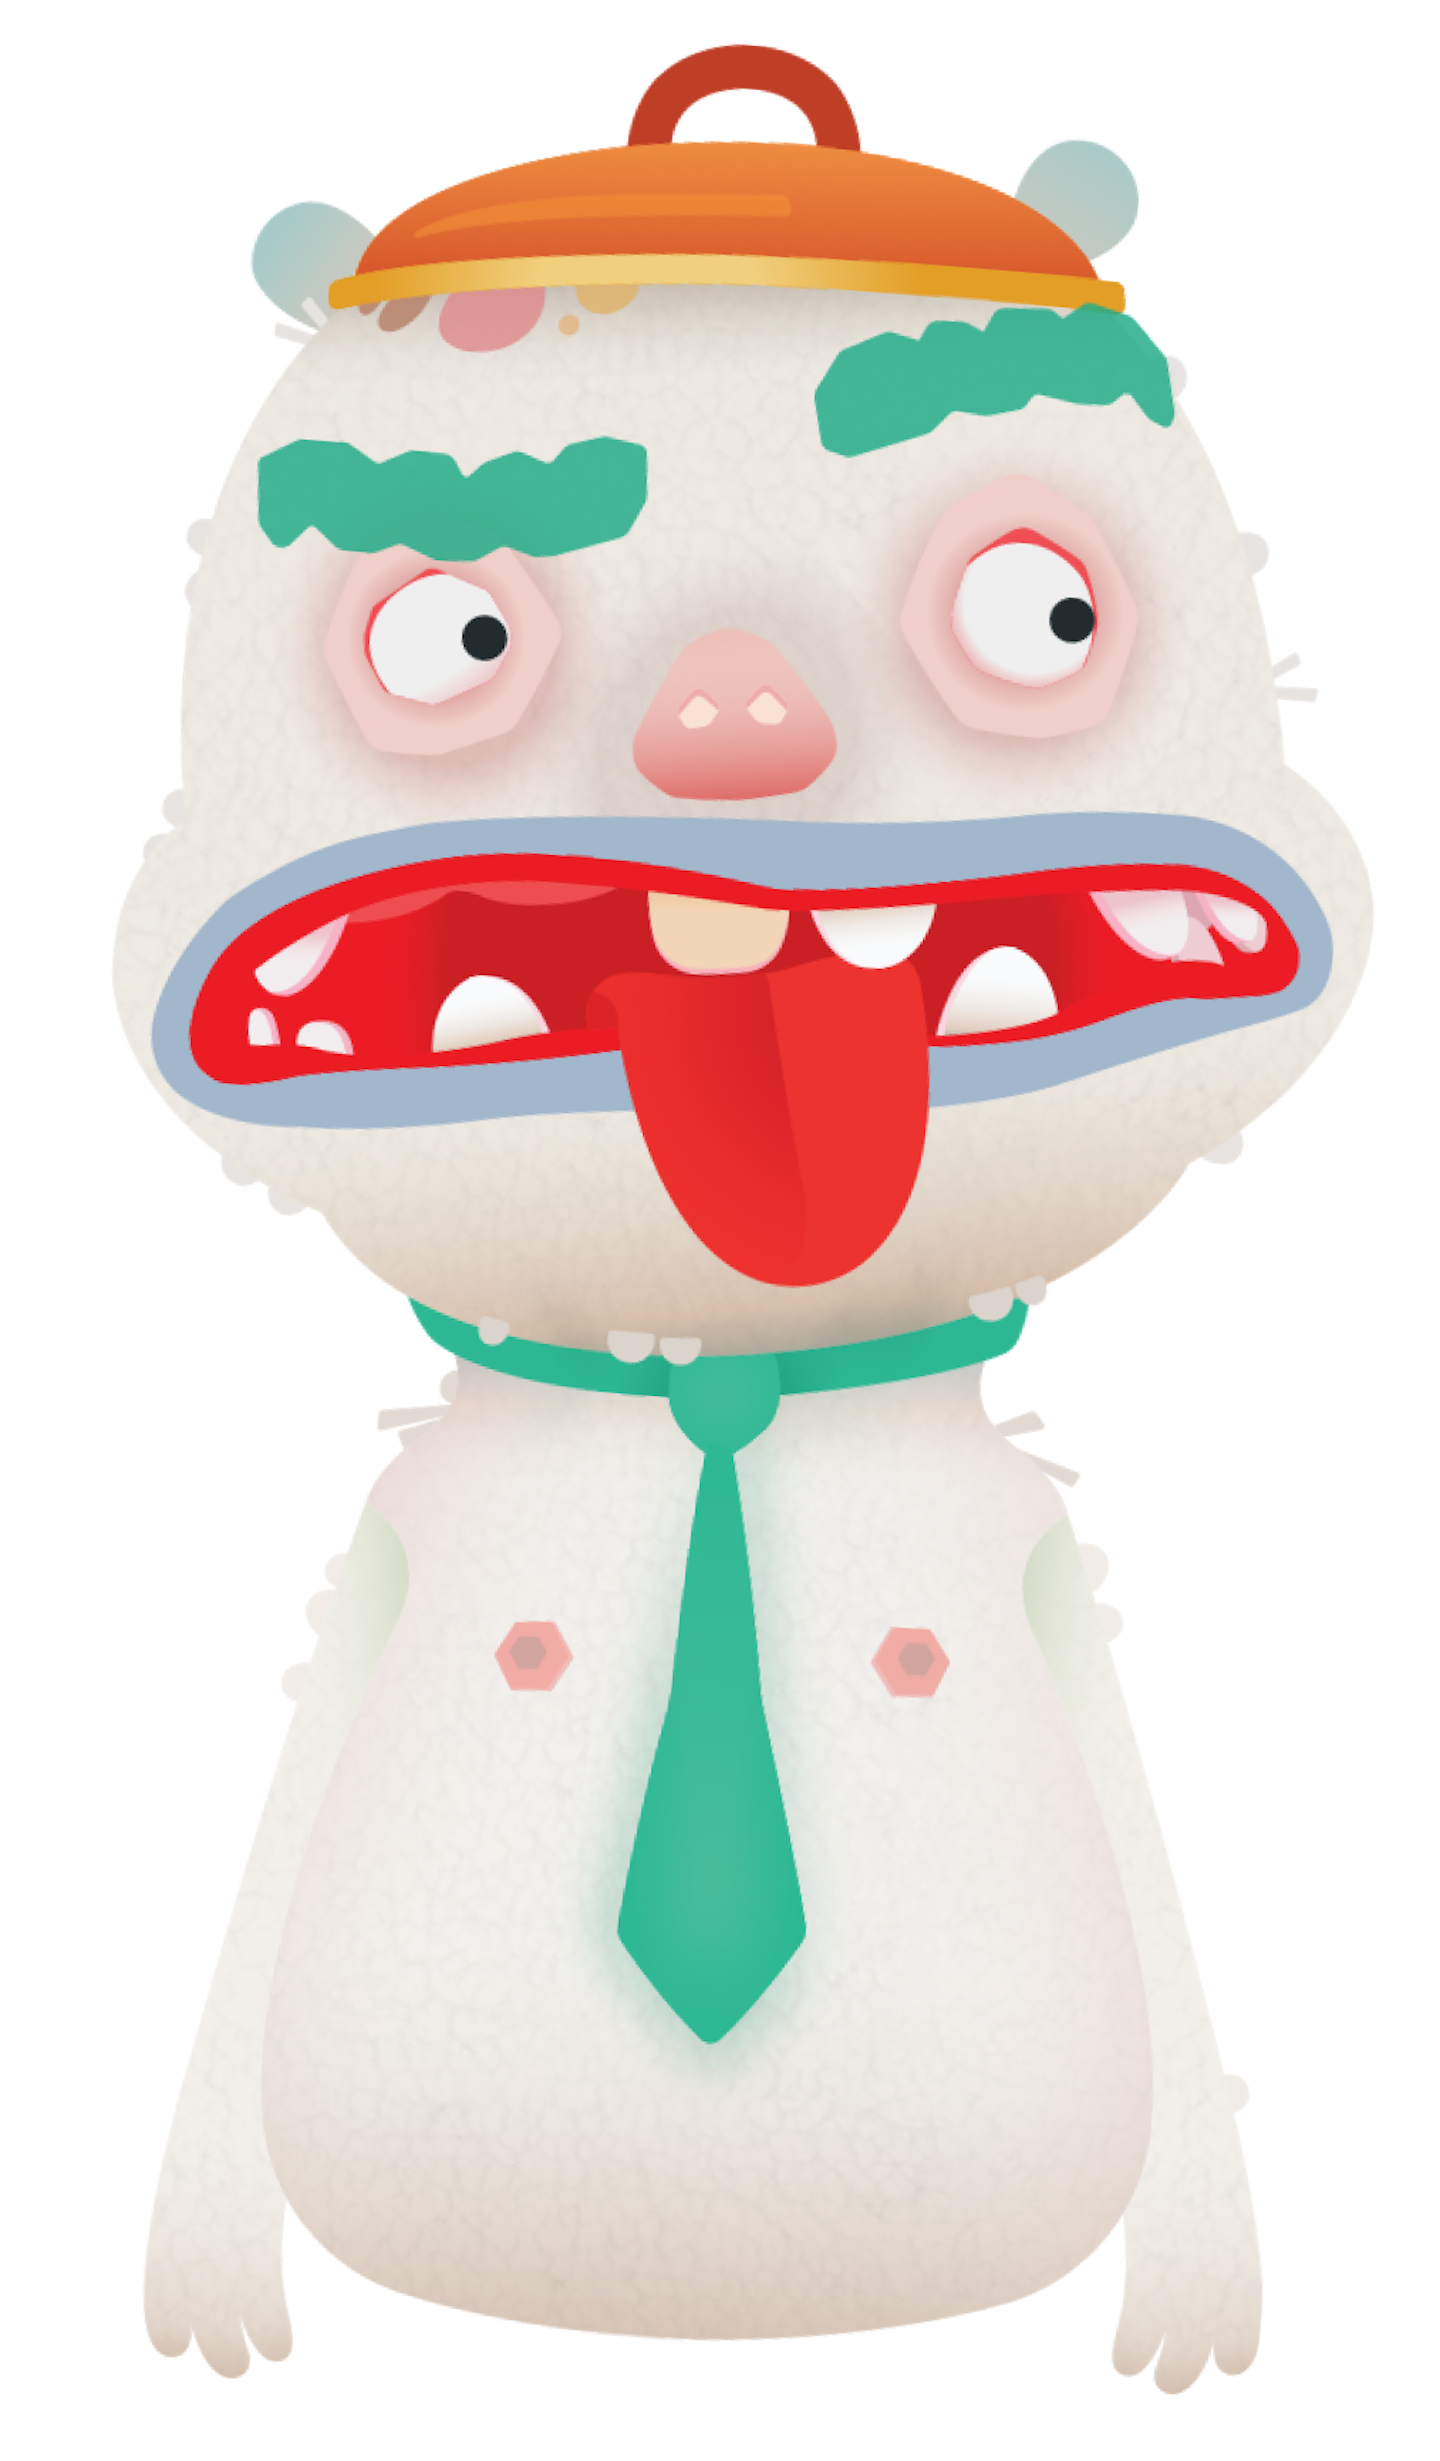 This is an image of one of the fantasy characters from the Toca Kitchen monsters app